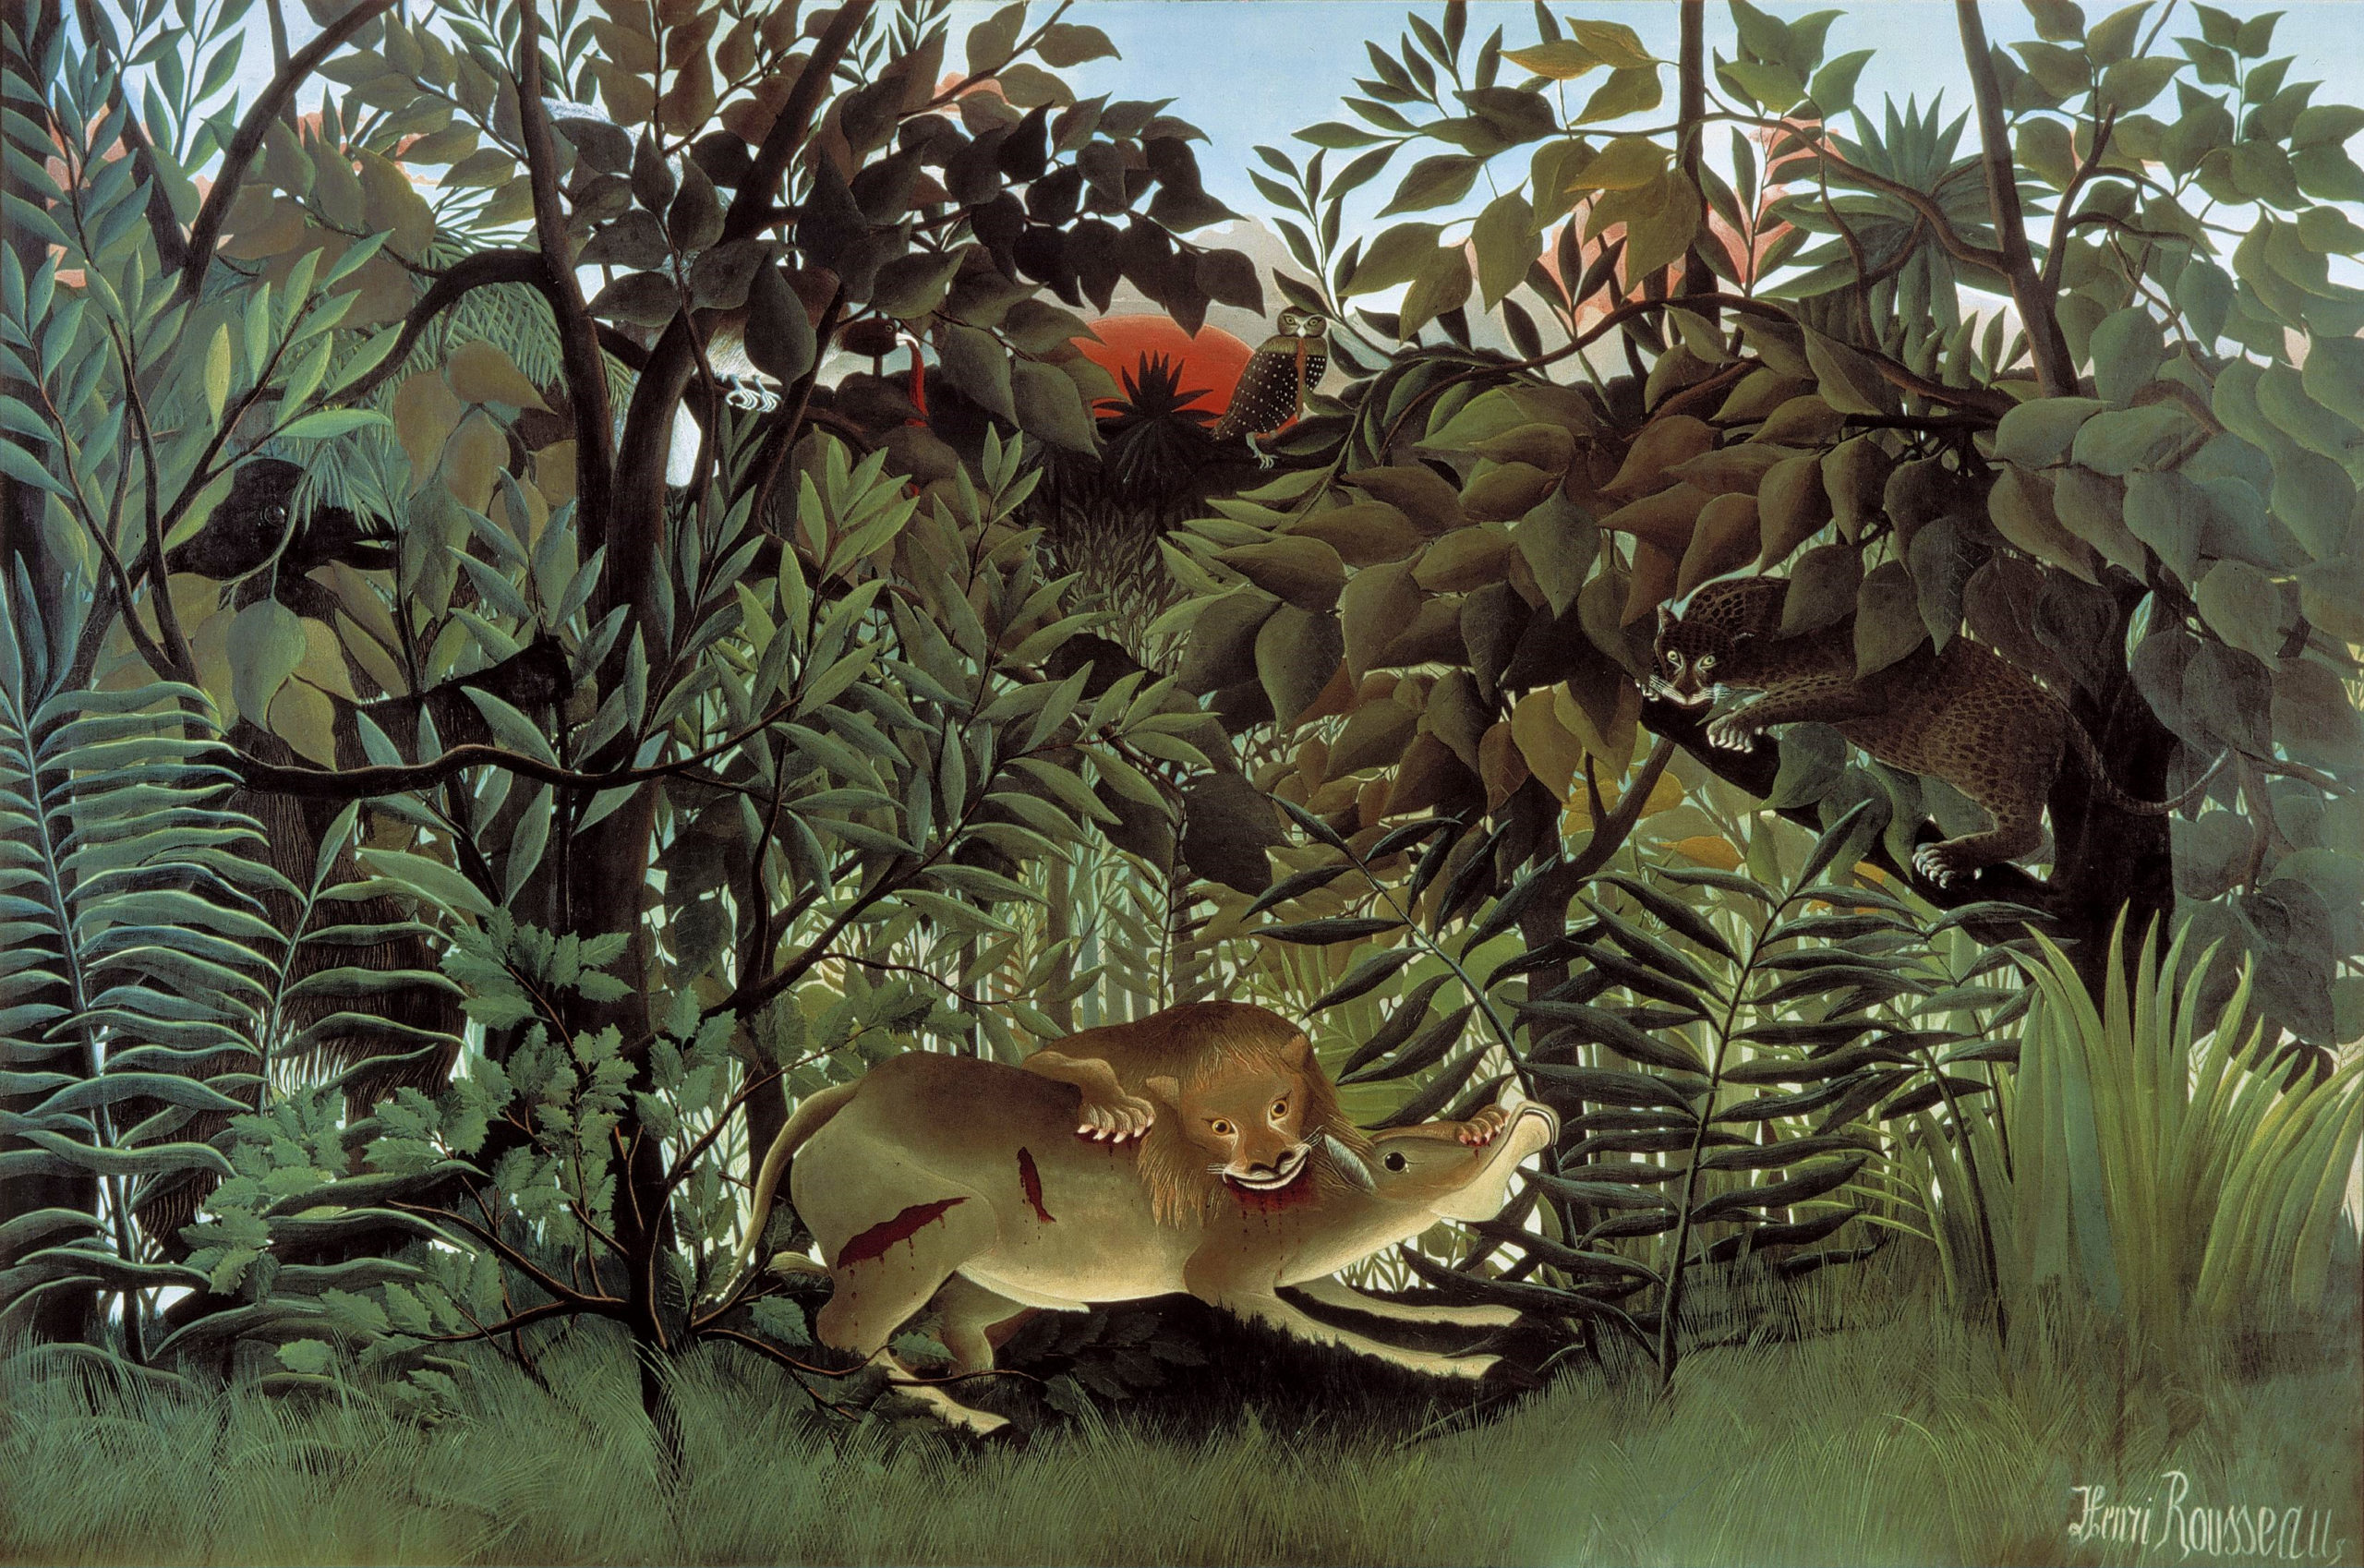 Henri Rousseau, The Hungry Lion Throws Itself on the Antelope, 1905, oil on canvas, 200 x 301 cm (Fondation Beyeler, Basel)